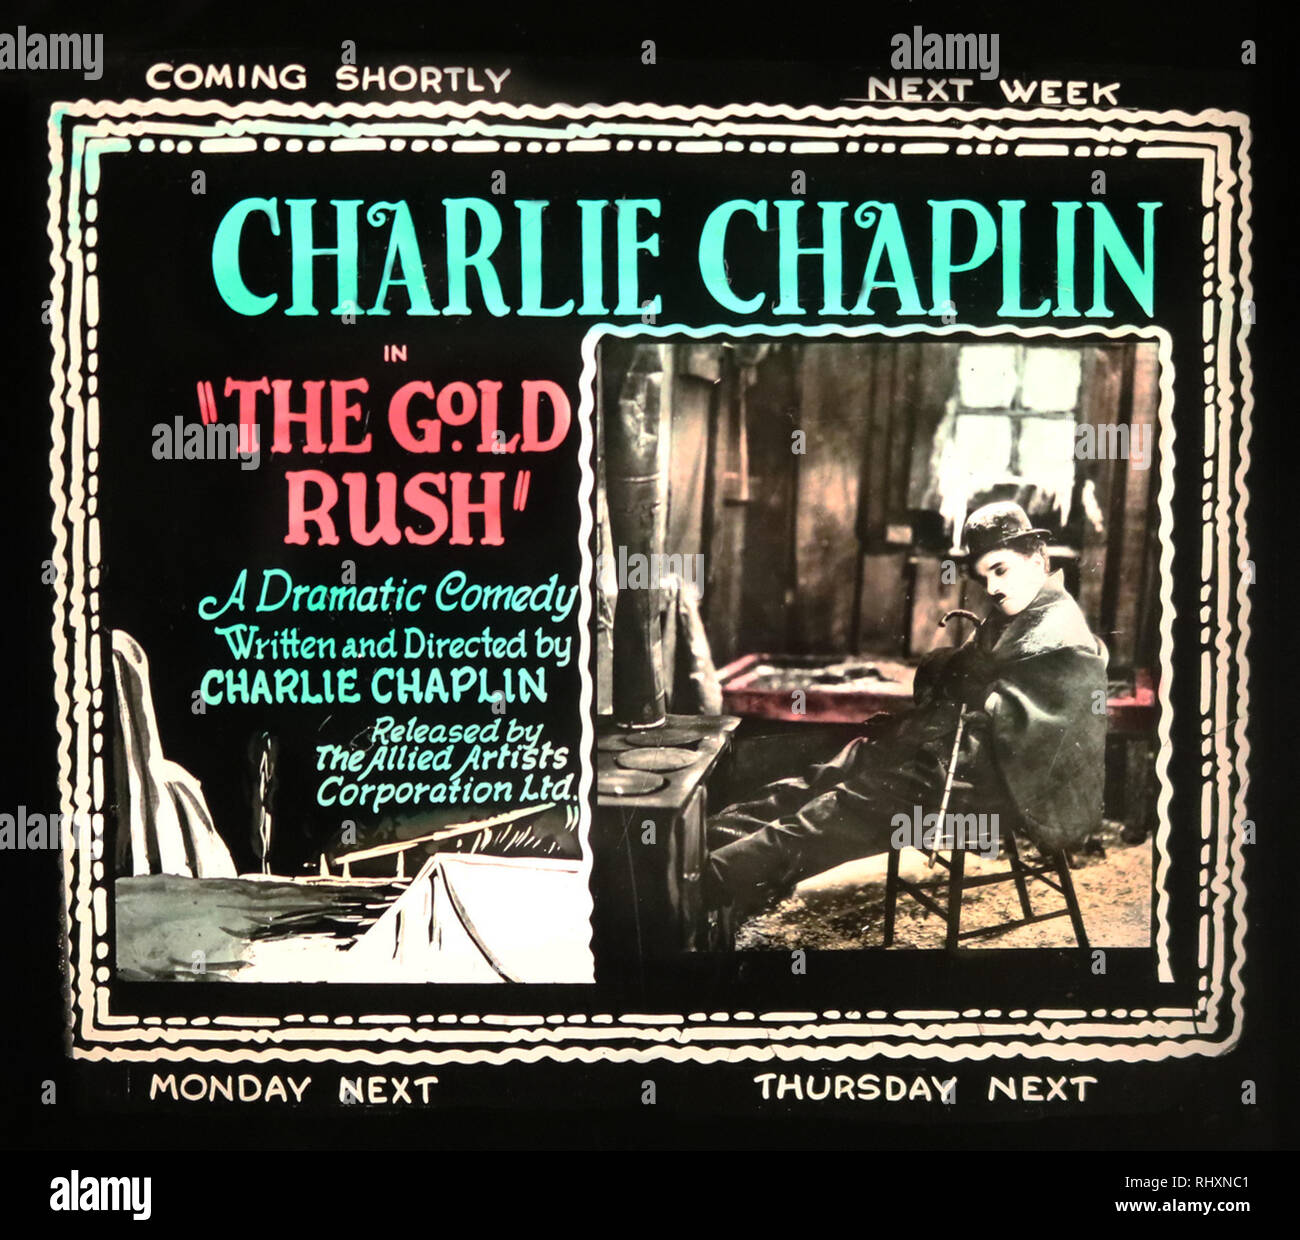 Charlie Chaplin The Gold Rush forthcoming attraction movie cinema advertisment Stock Photo